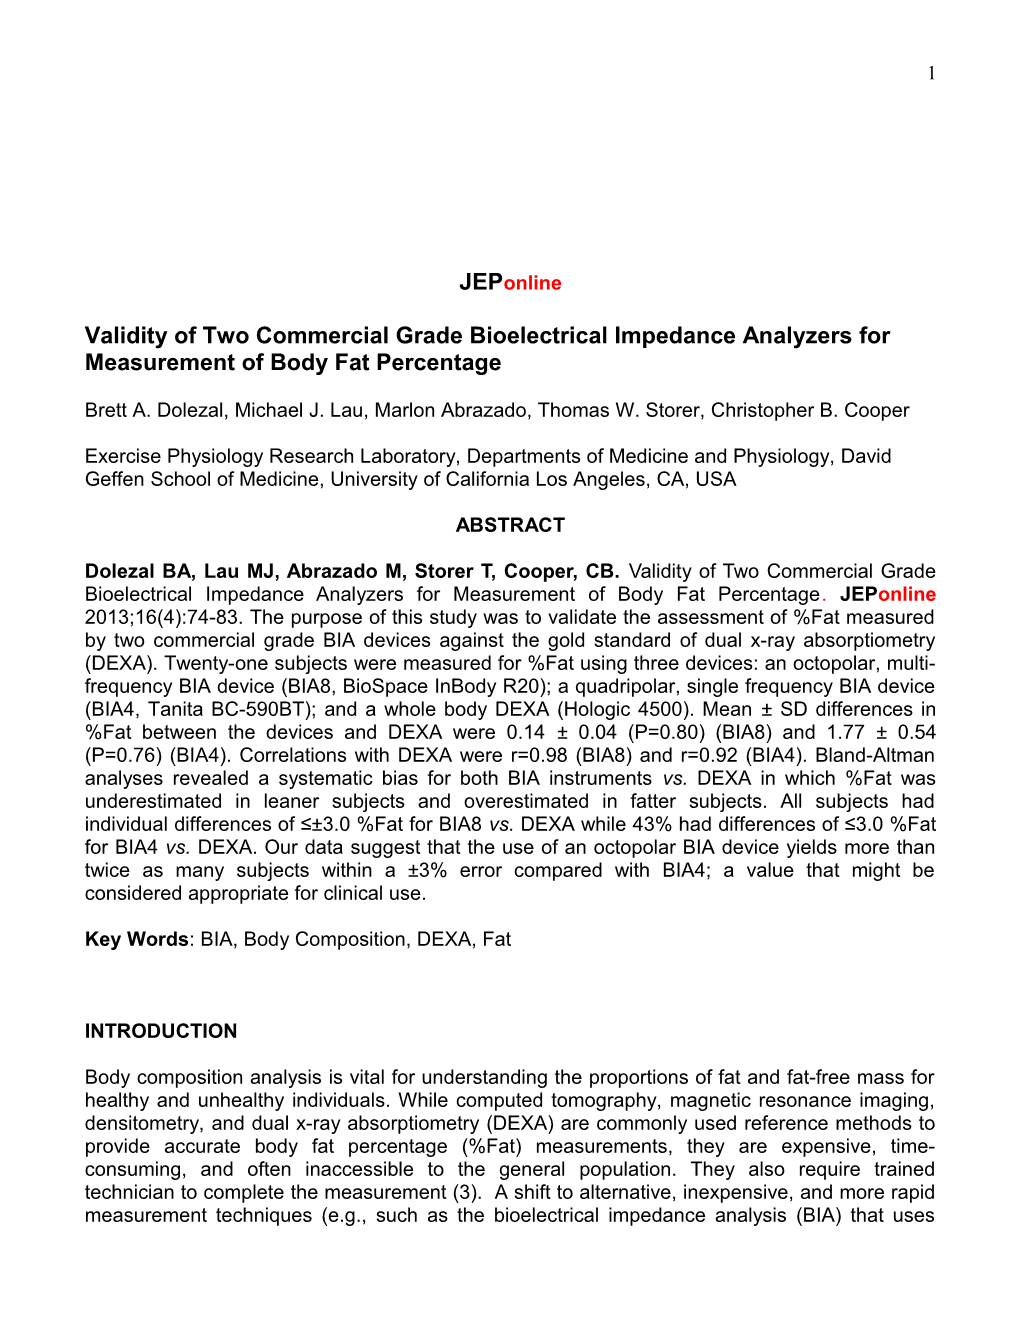 Validity of Two Commercial Grade Bioelectrical Impedance Analyzers for Measurement Of